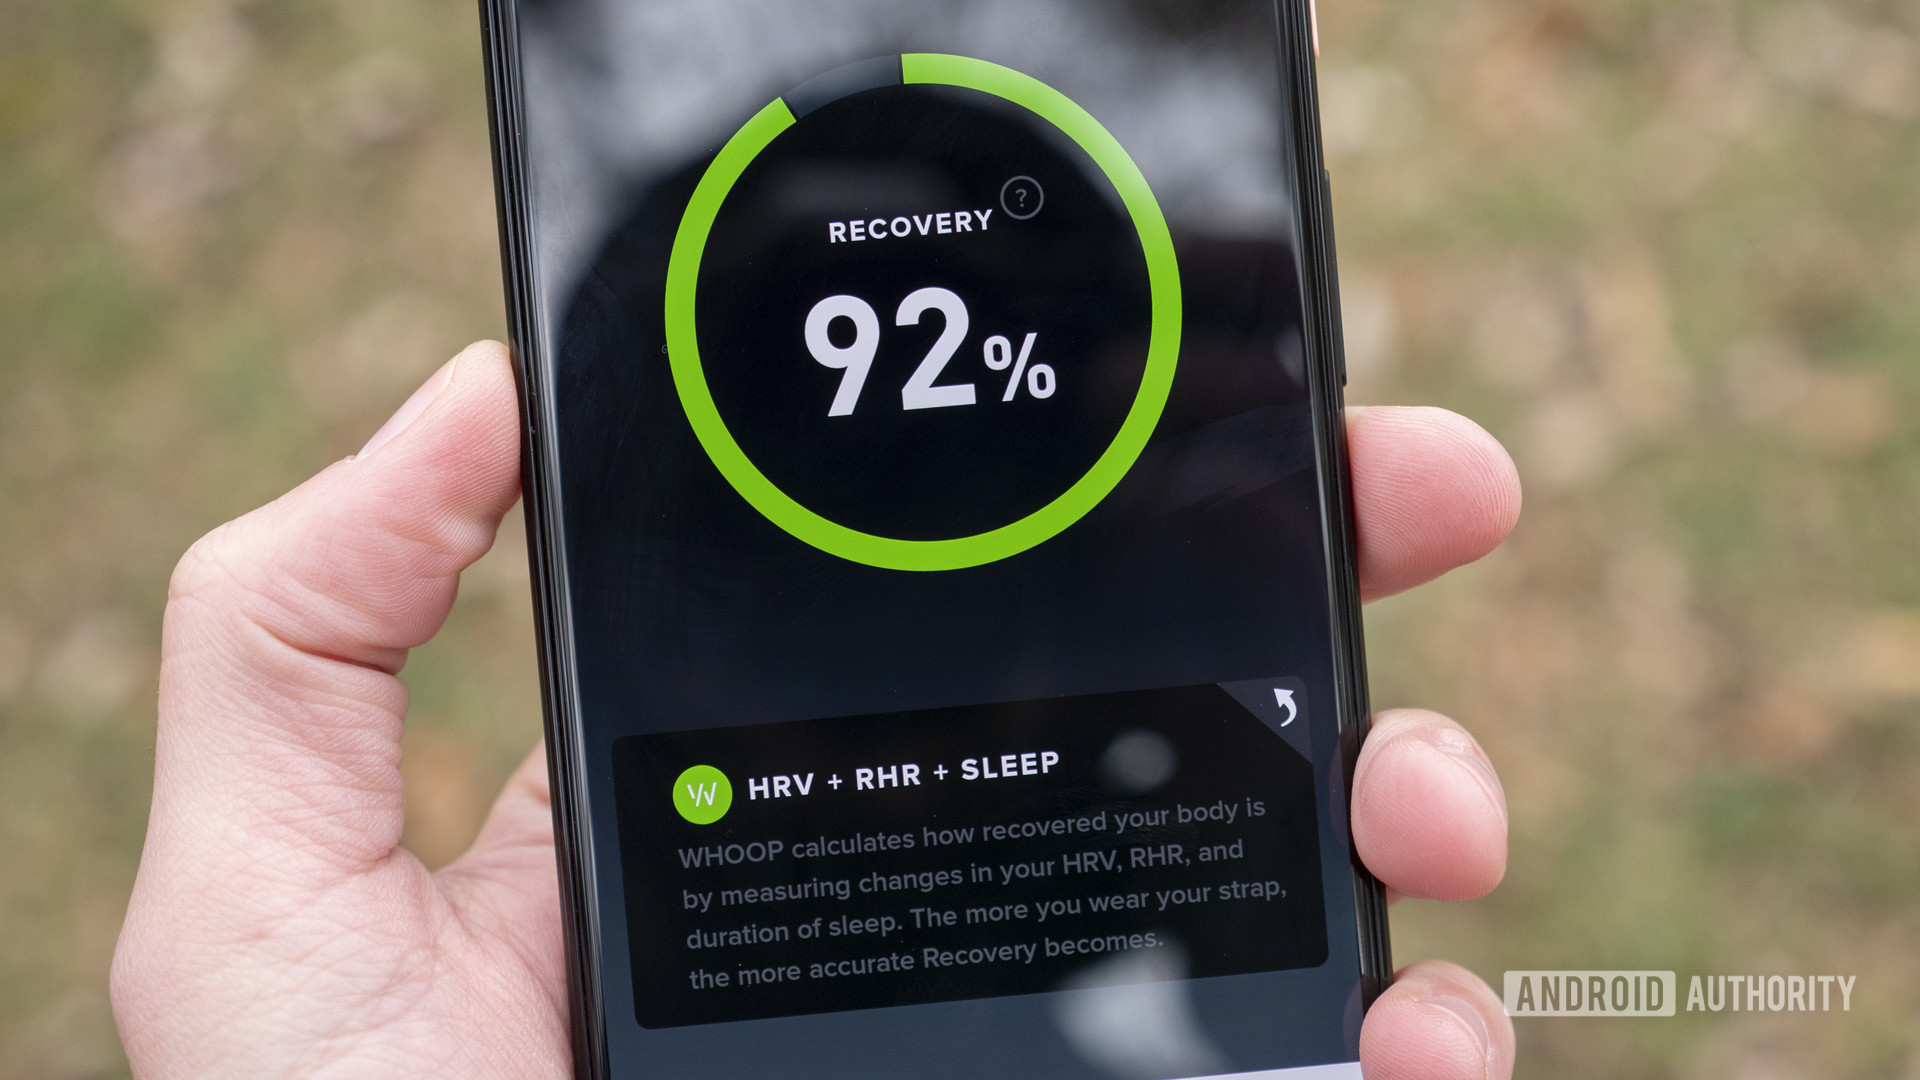 whoop strap 3.0 review whoop app recovery percentage